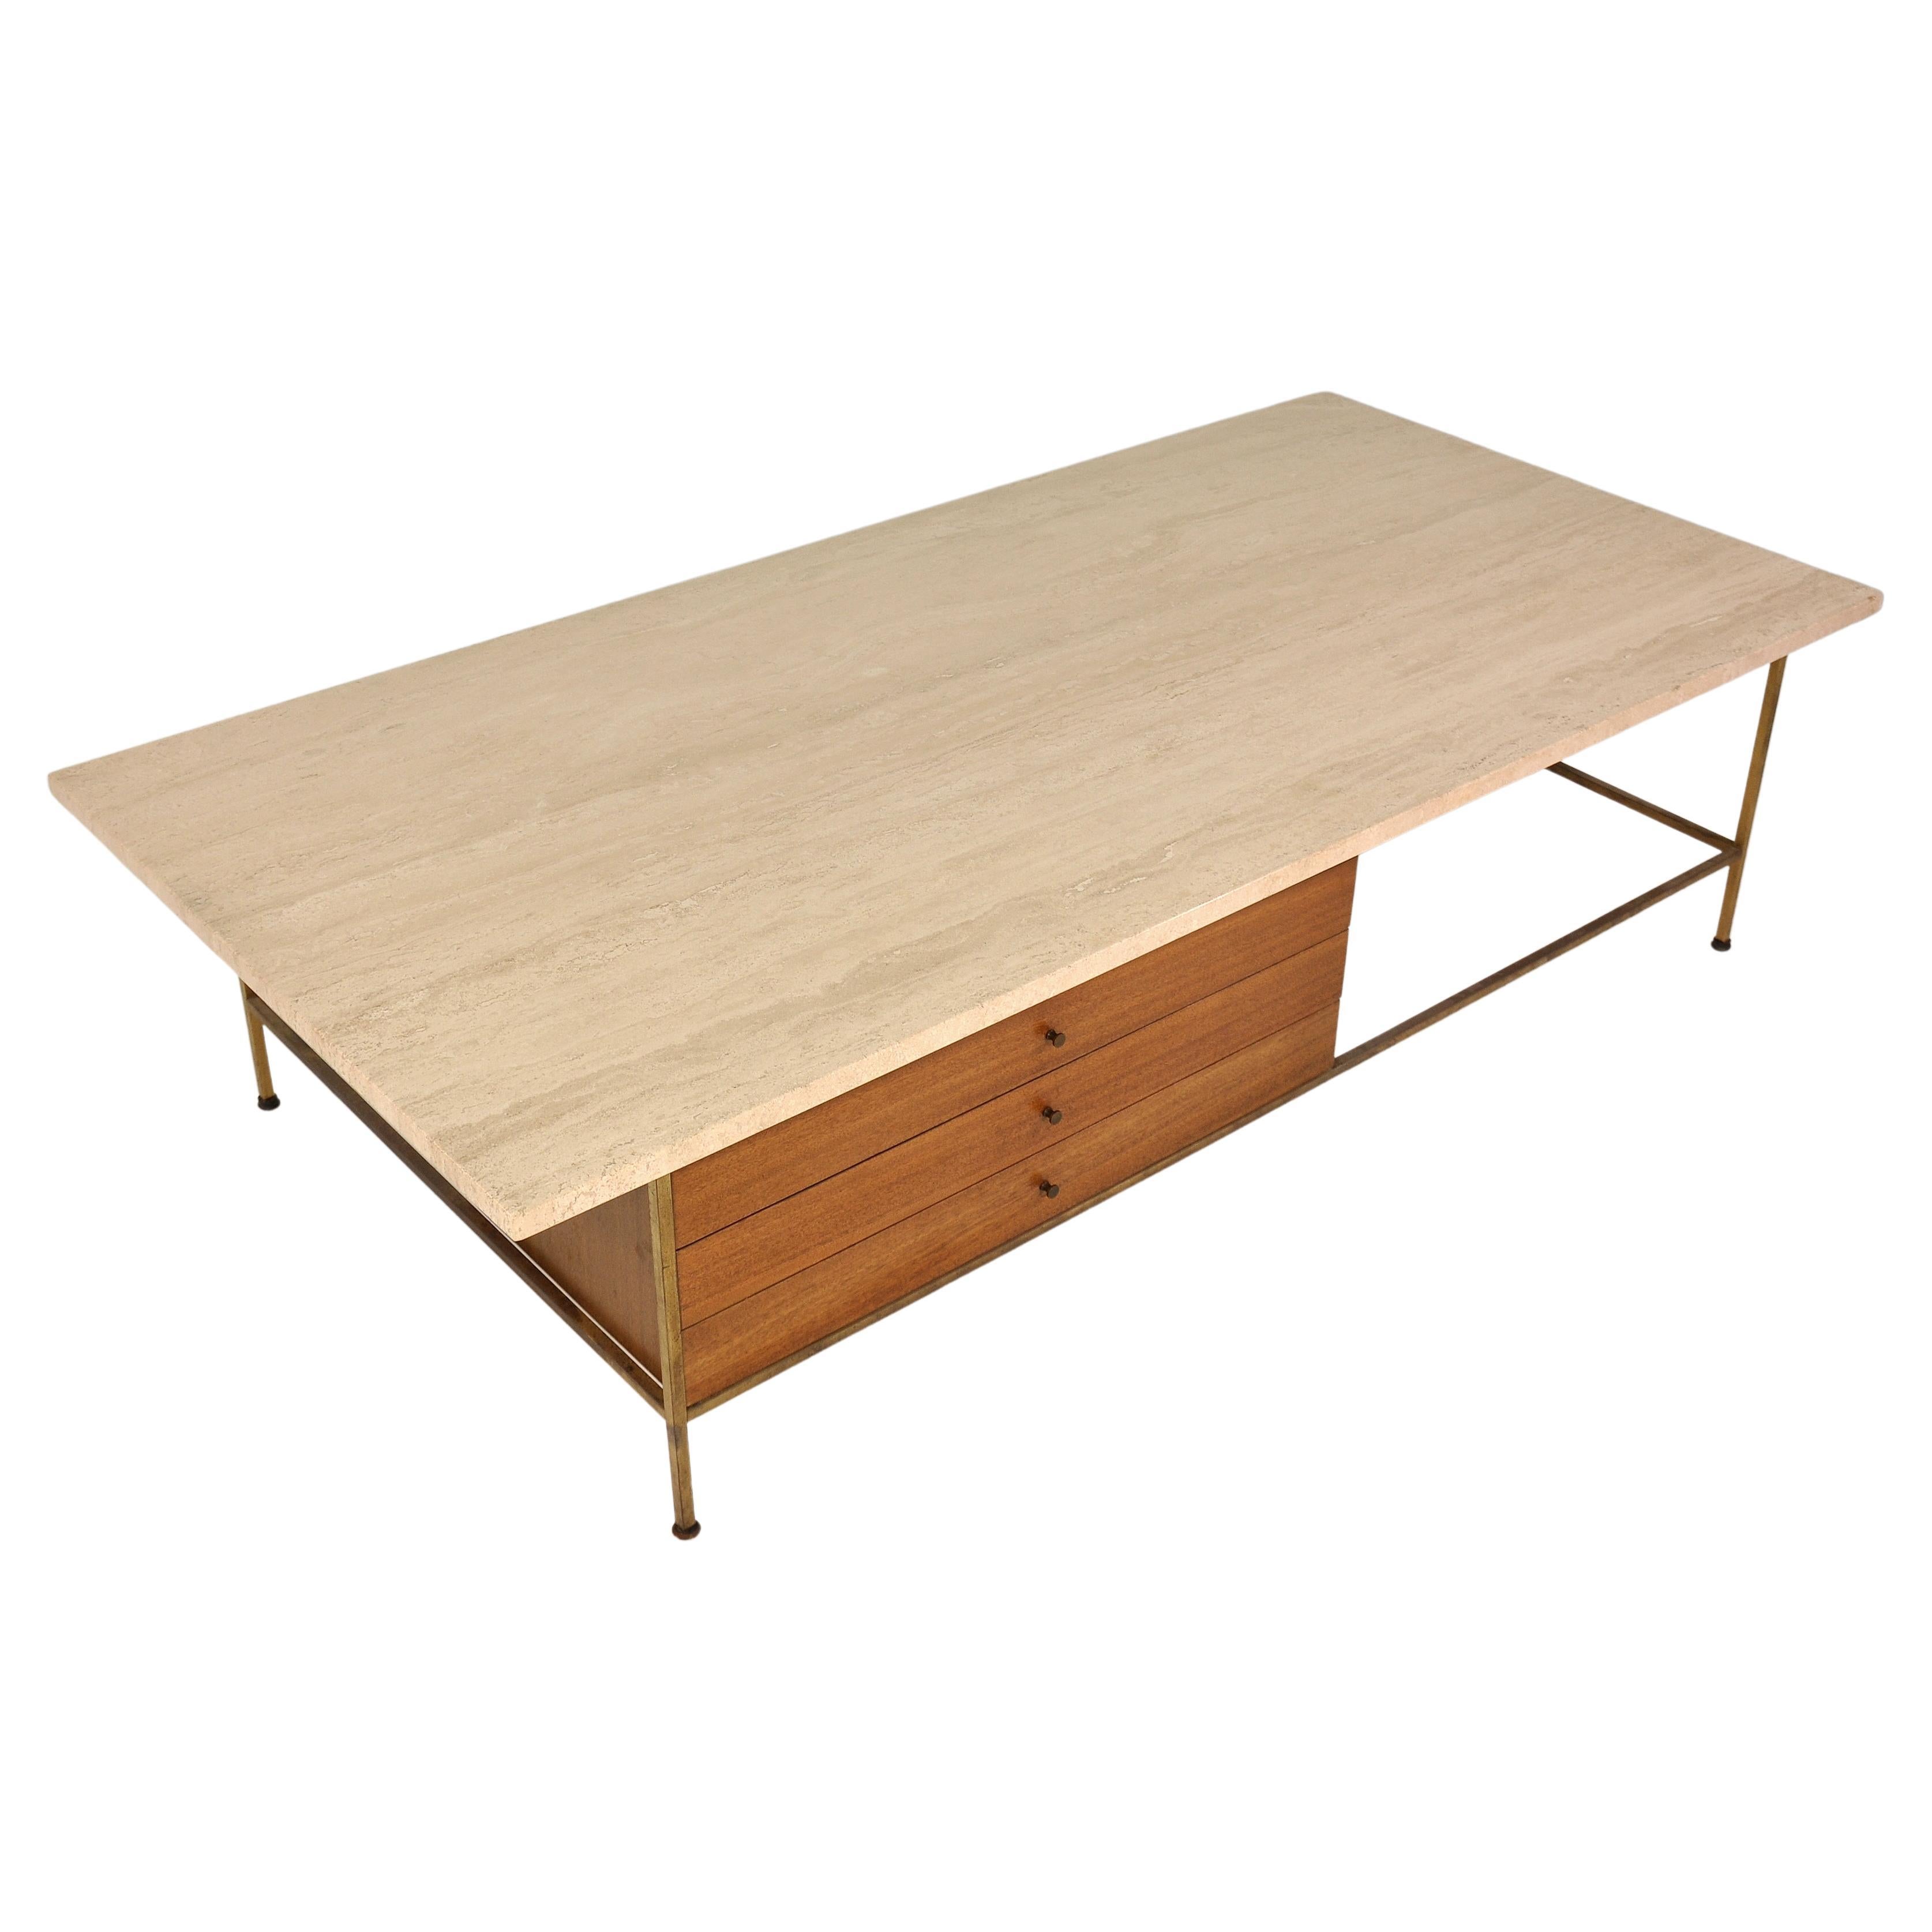 Paul McCobb Irwin Collection Brass and Travertine Coffee Table by Calvin 5